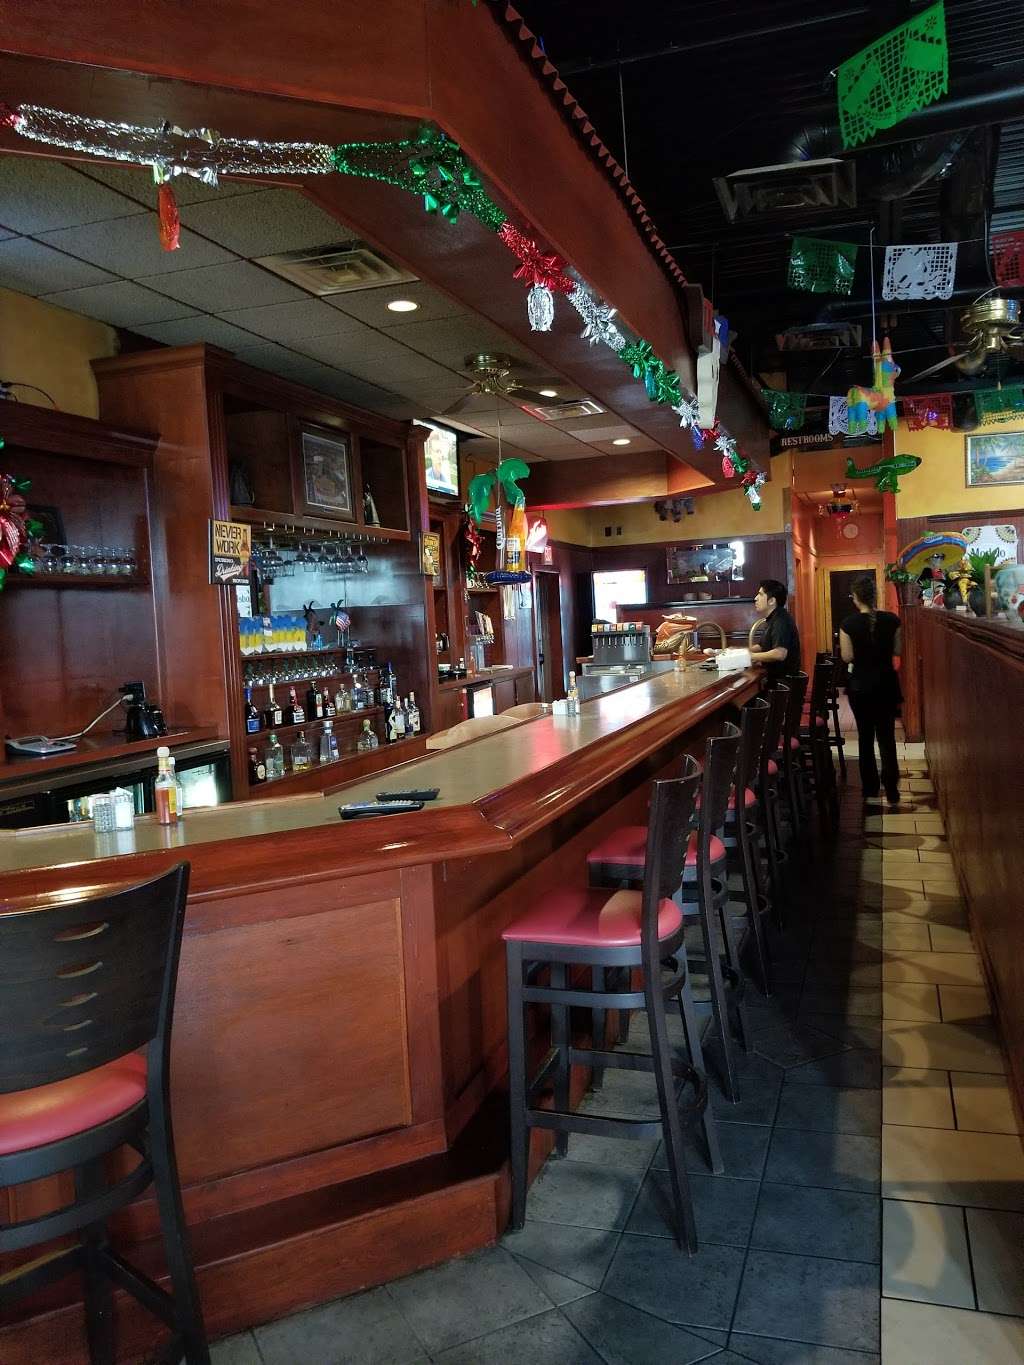 Guerreros Mexican Restaurant | 5905 Madison Ave, Indianapolis, IN 46227, USA | Phone: (317) 786-0972